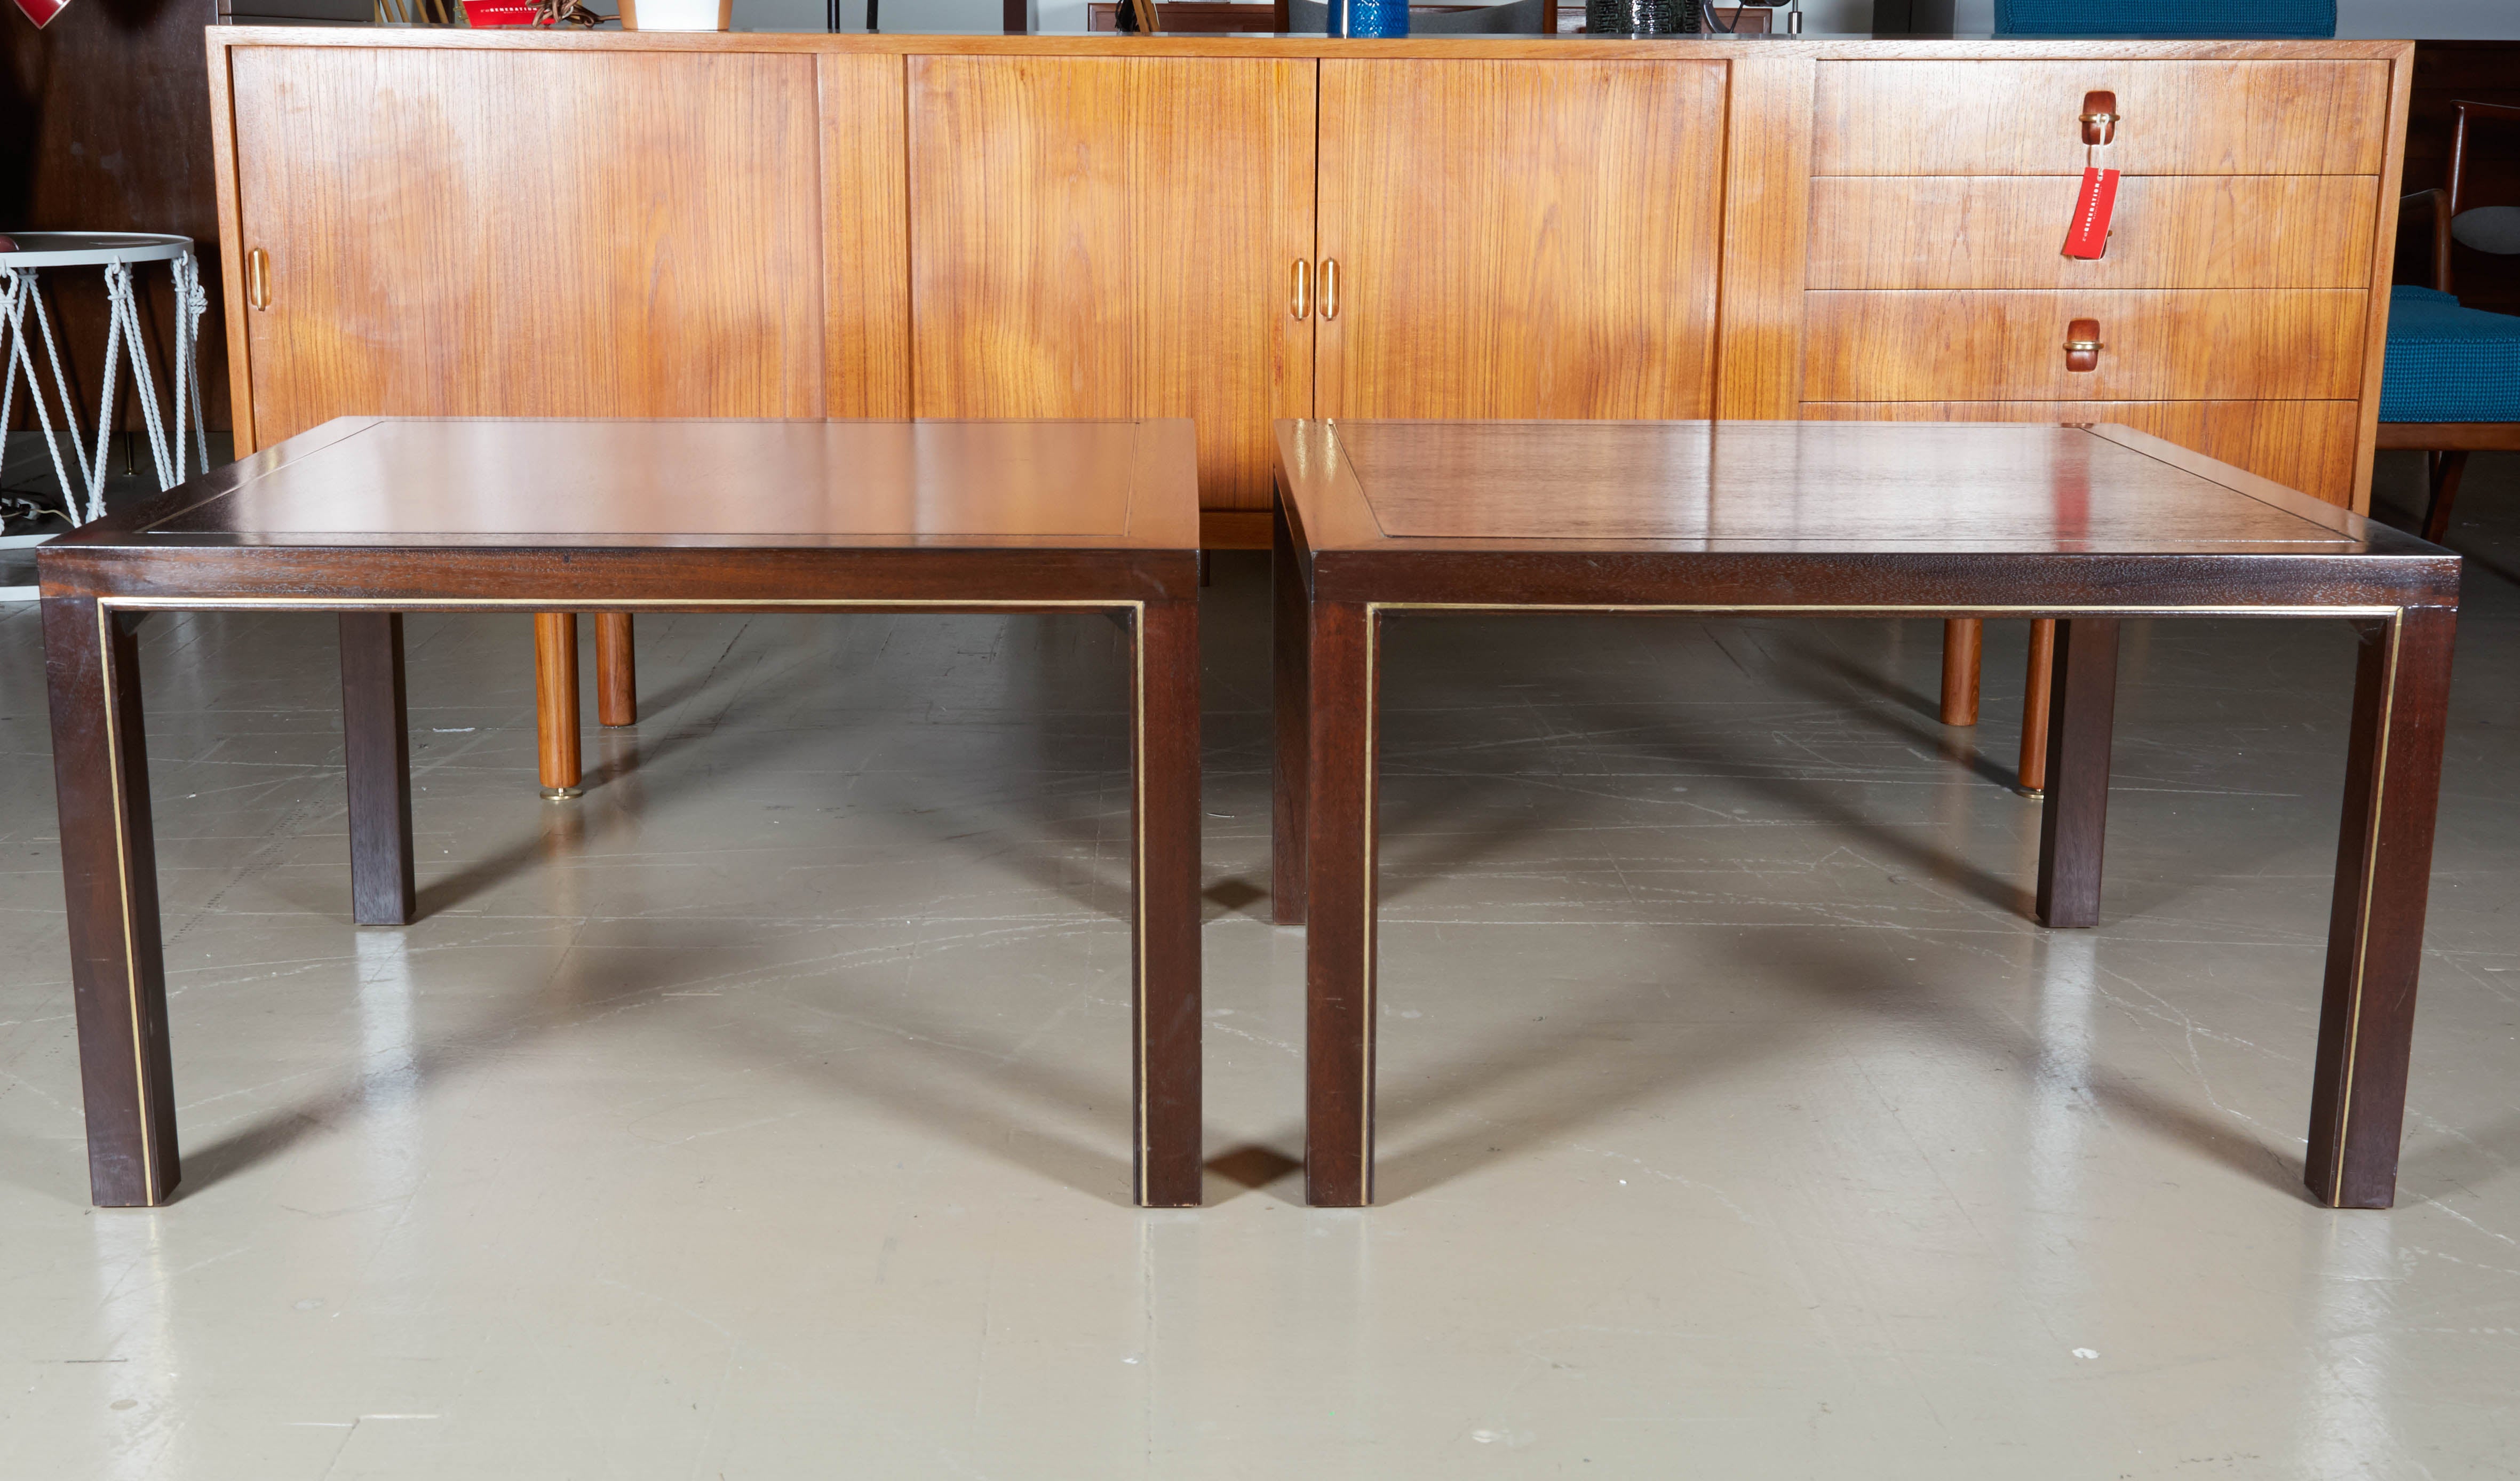 Pair of Mahogany End Tables with Inlaid Brass by Edward Wormley for Dunbar